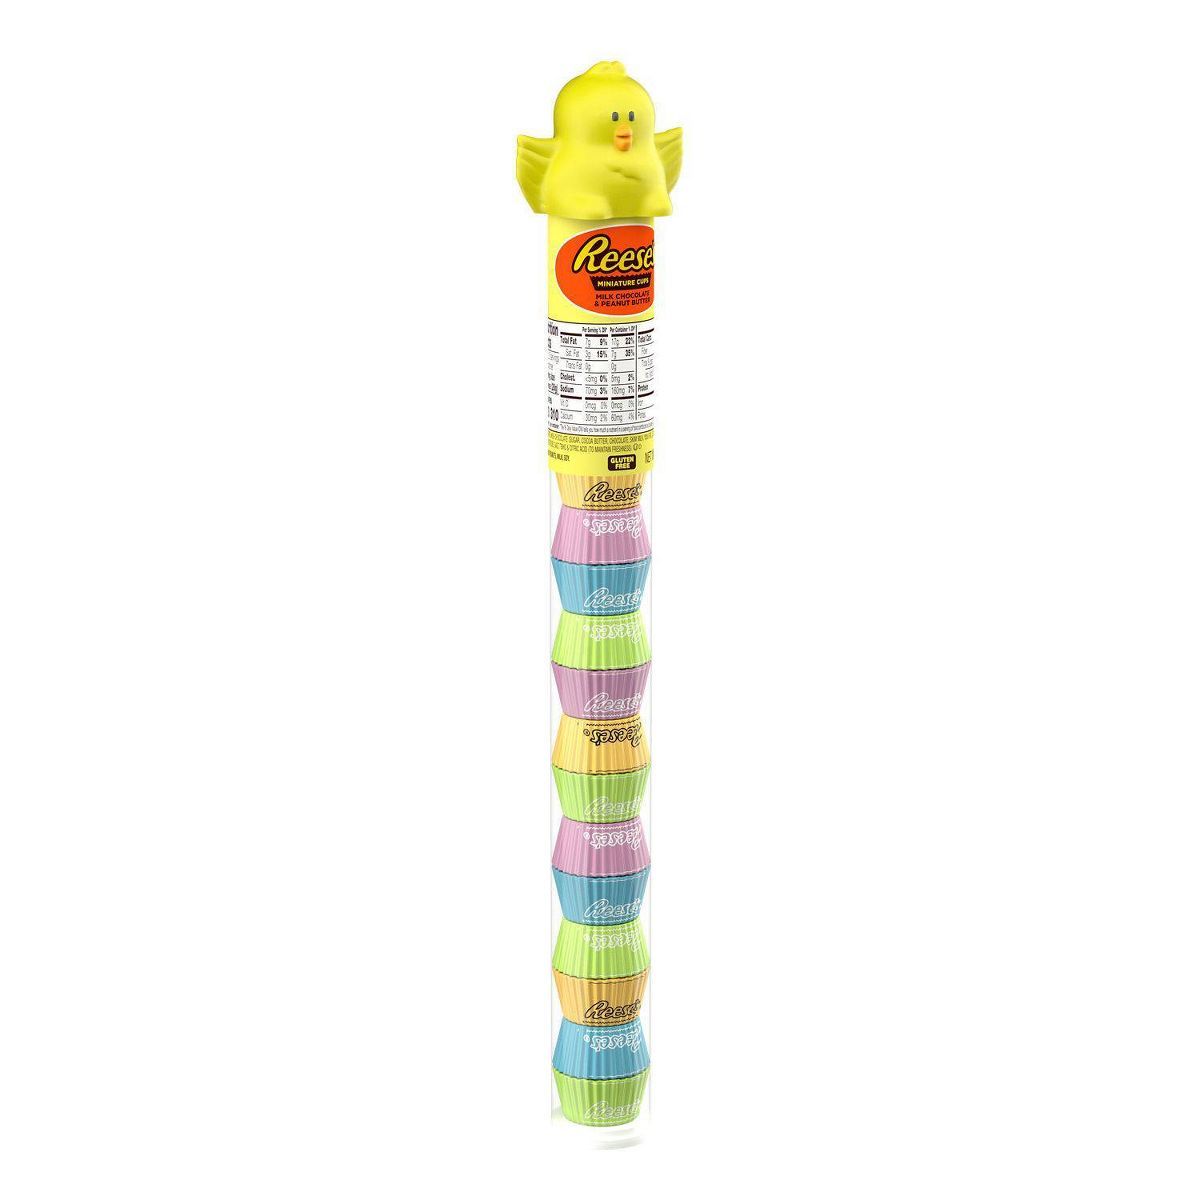 Reese's Easter Cane - 2.17oz | Target